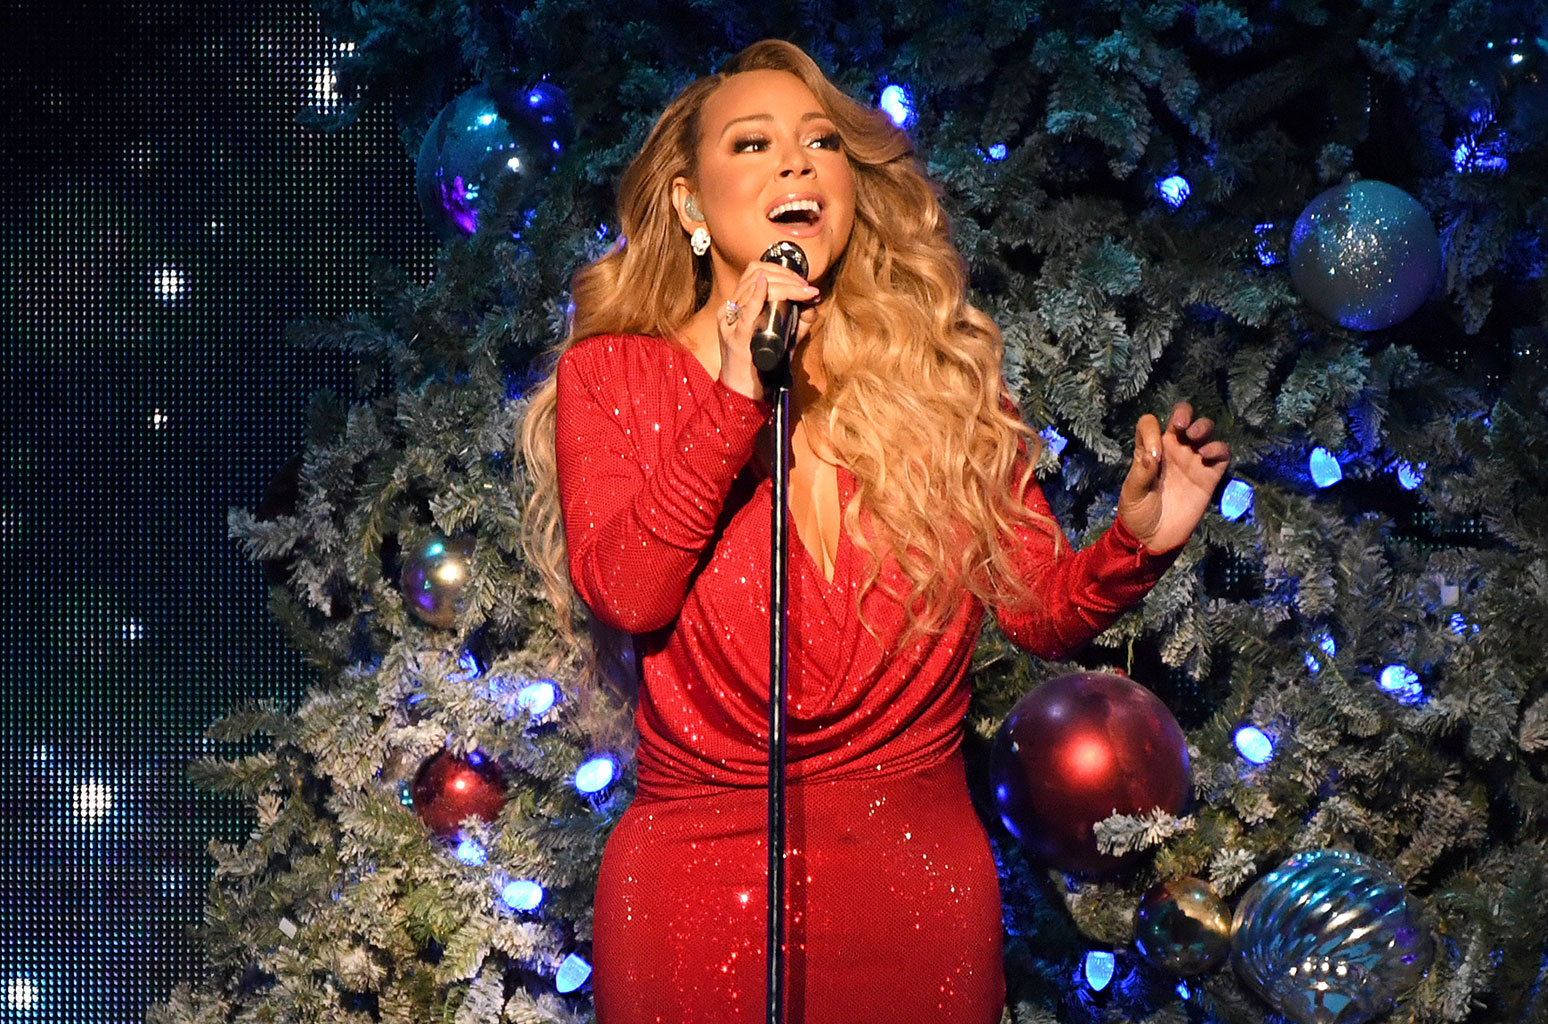 Mariah Carey Canzone Di Natale.All I Want For Christmas Is You E Number One Nella Classifica Billboard Radio Gelosa Radio Gelosa Oh Yes